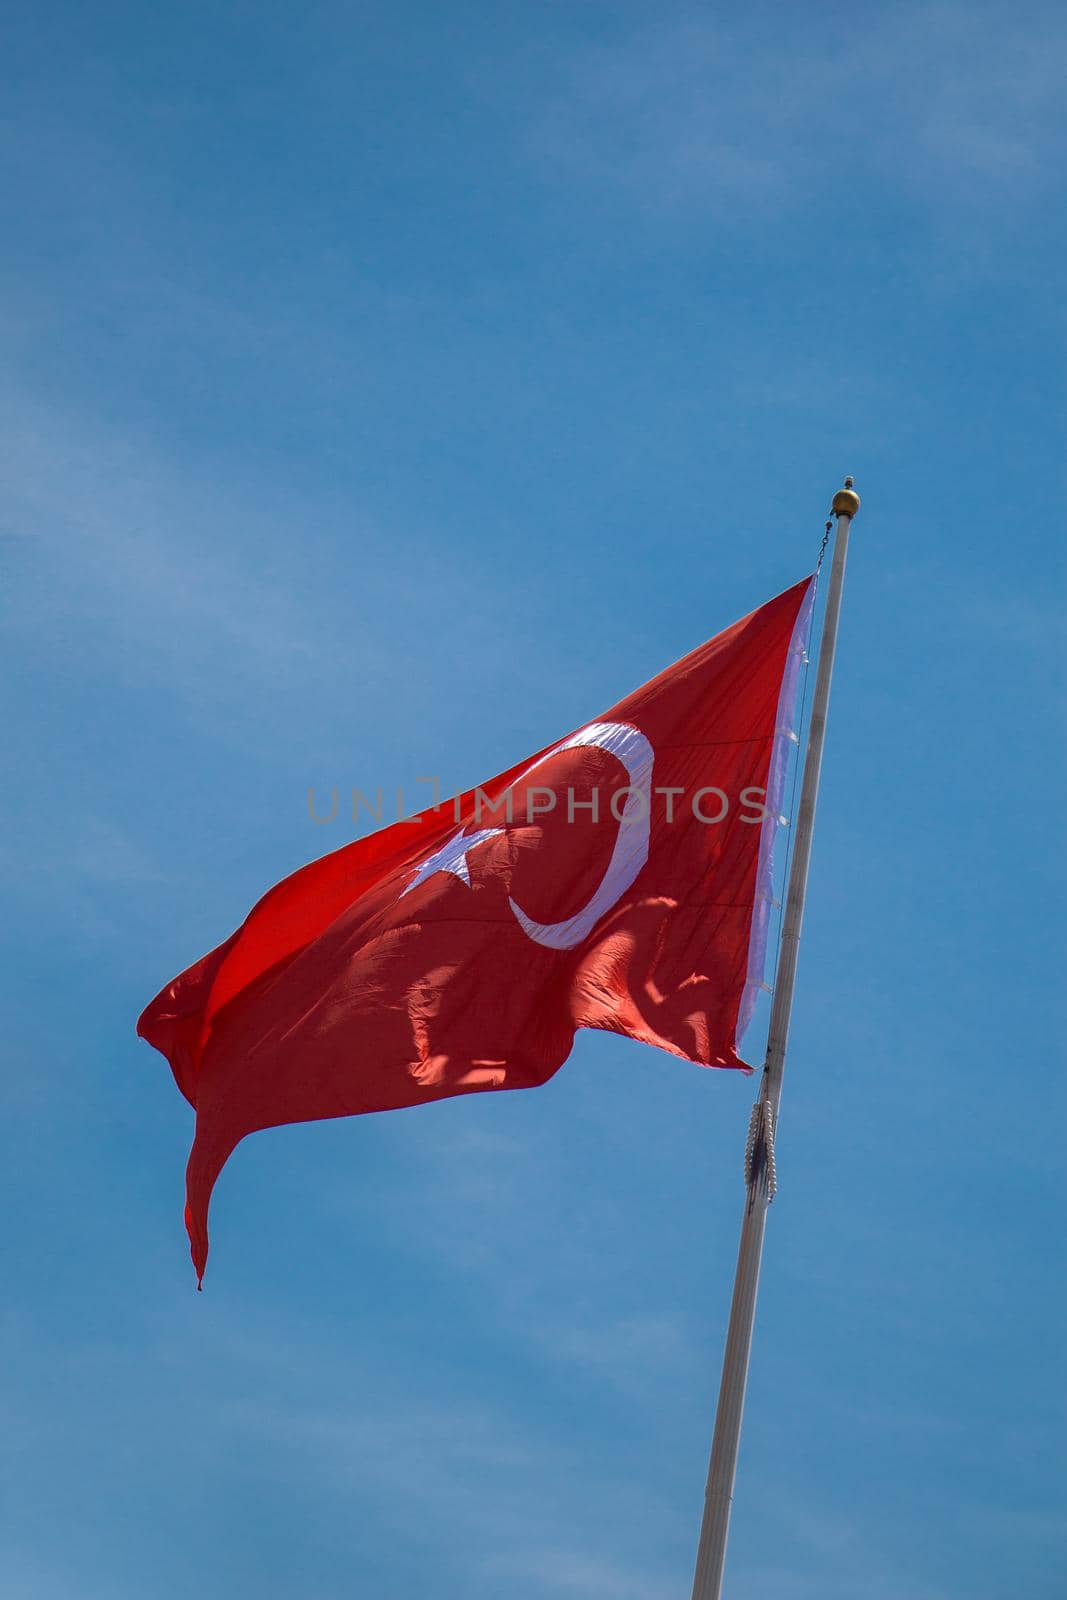 Turkish national flag with white star and moon in sky by berkay